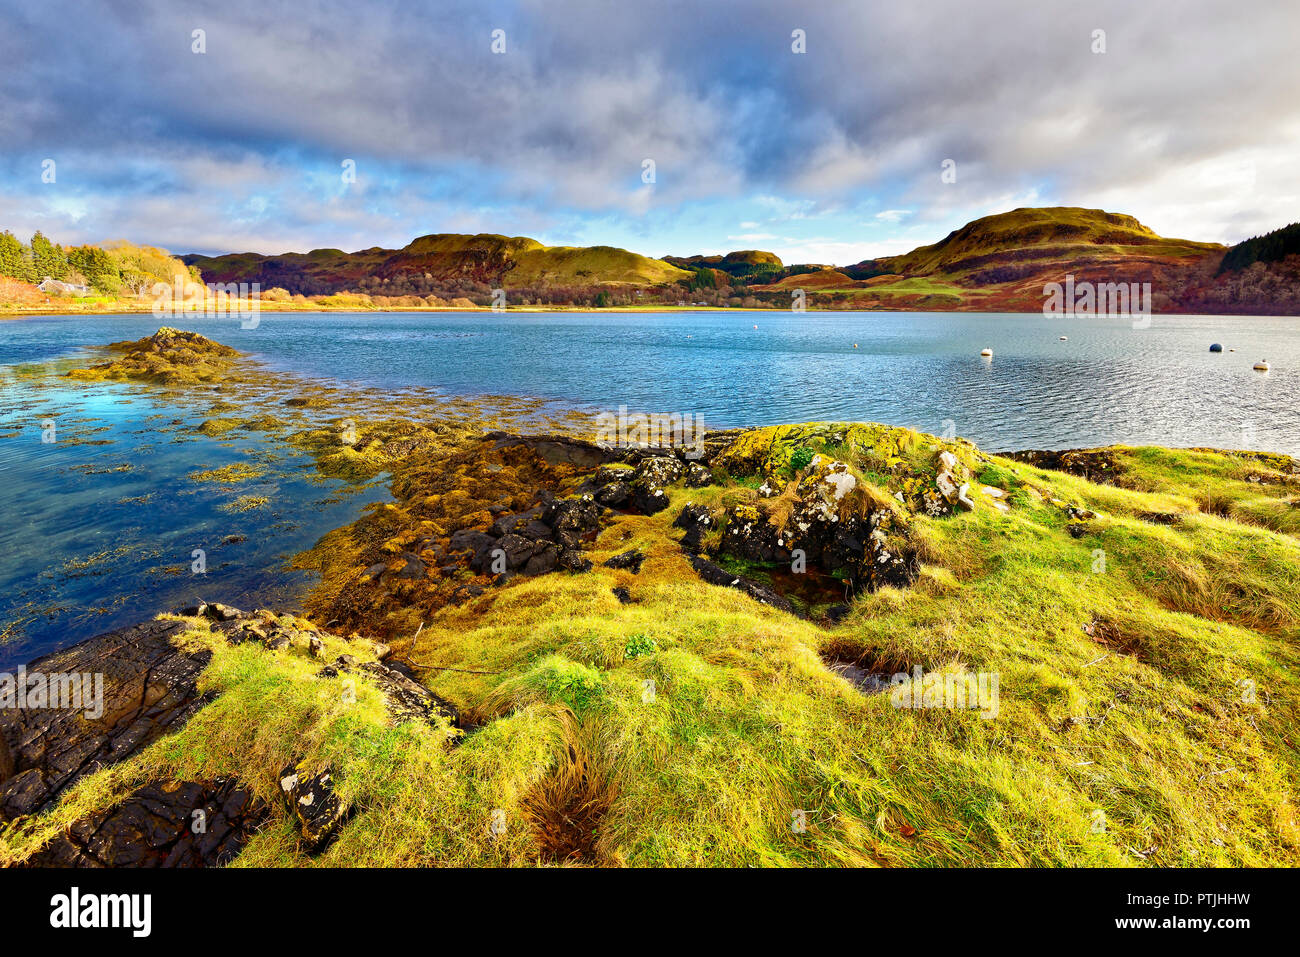 A sunny autumn view of Loch Craignish in the Scottish Highlands. Stock Photo